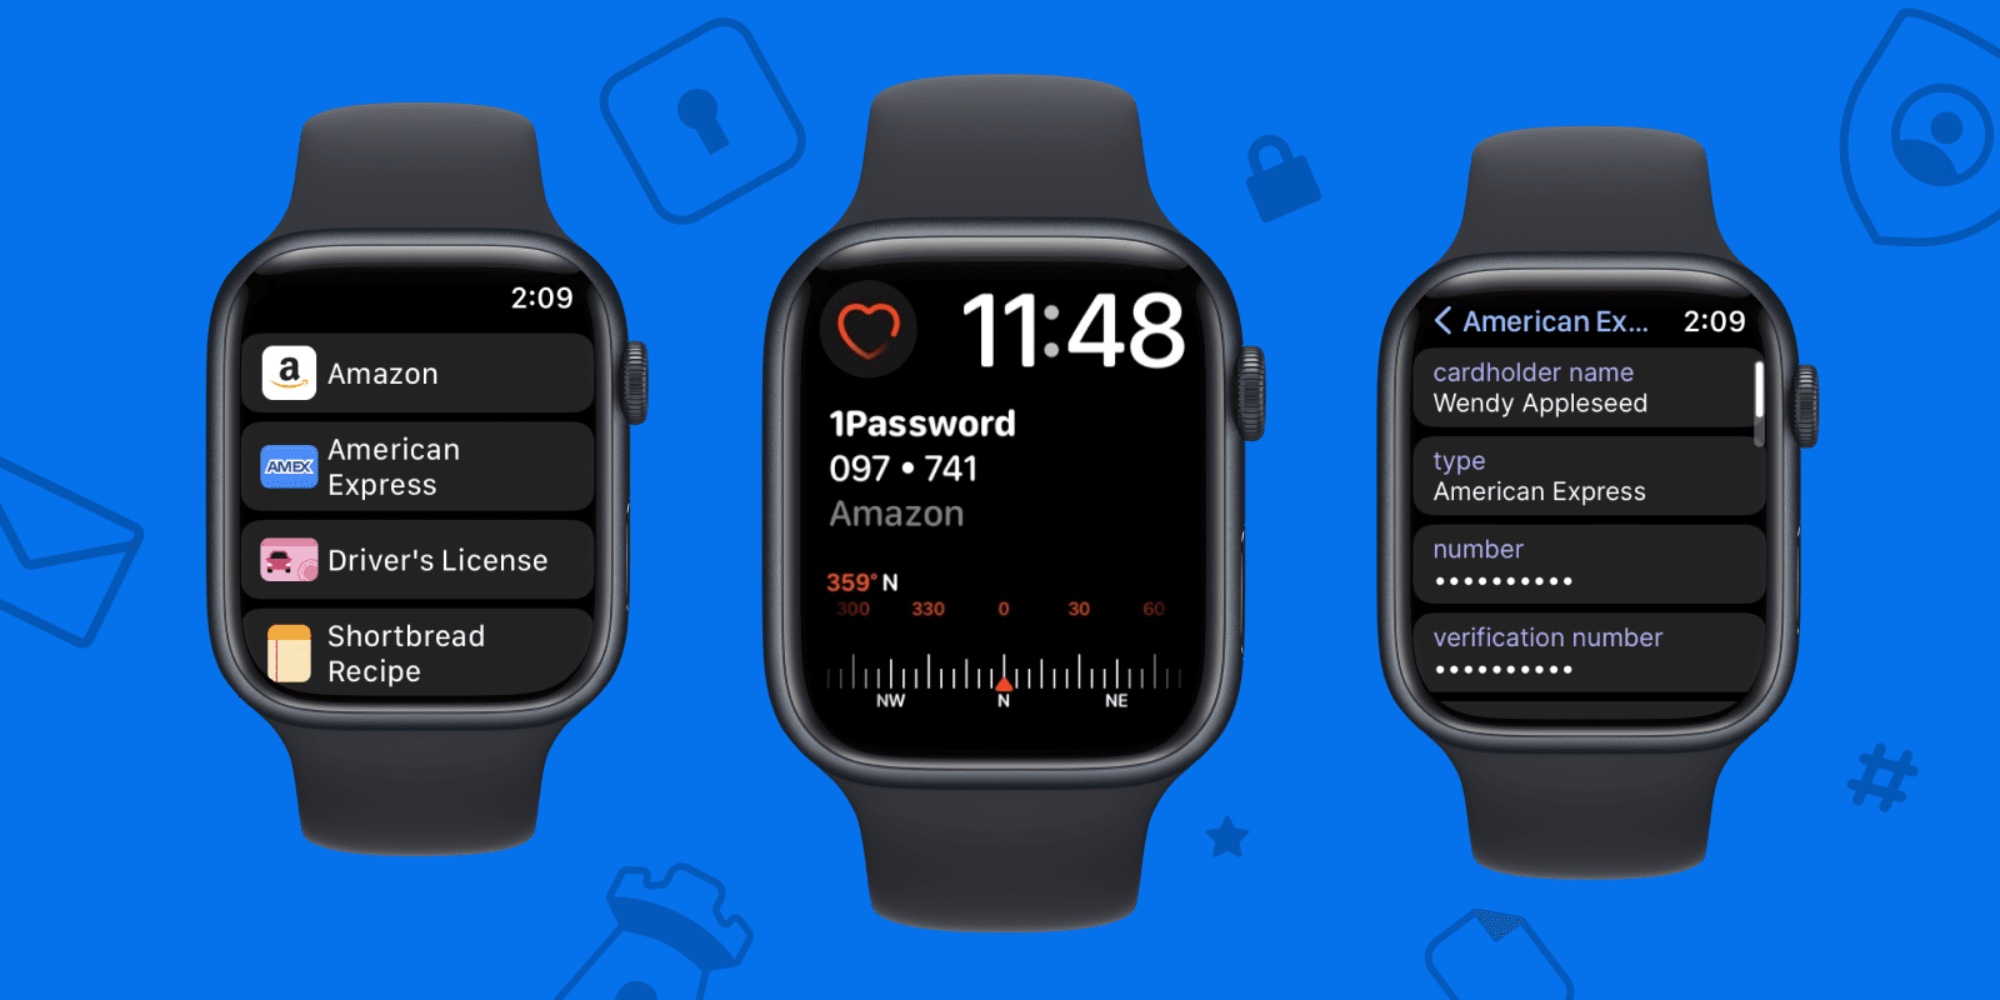 1Password 8 now available to Apple Watch users, here’s how it works